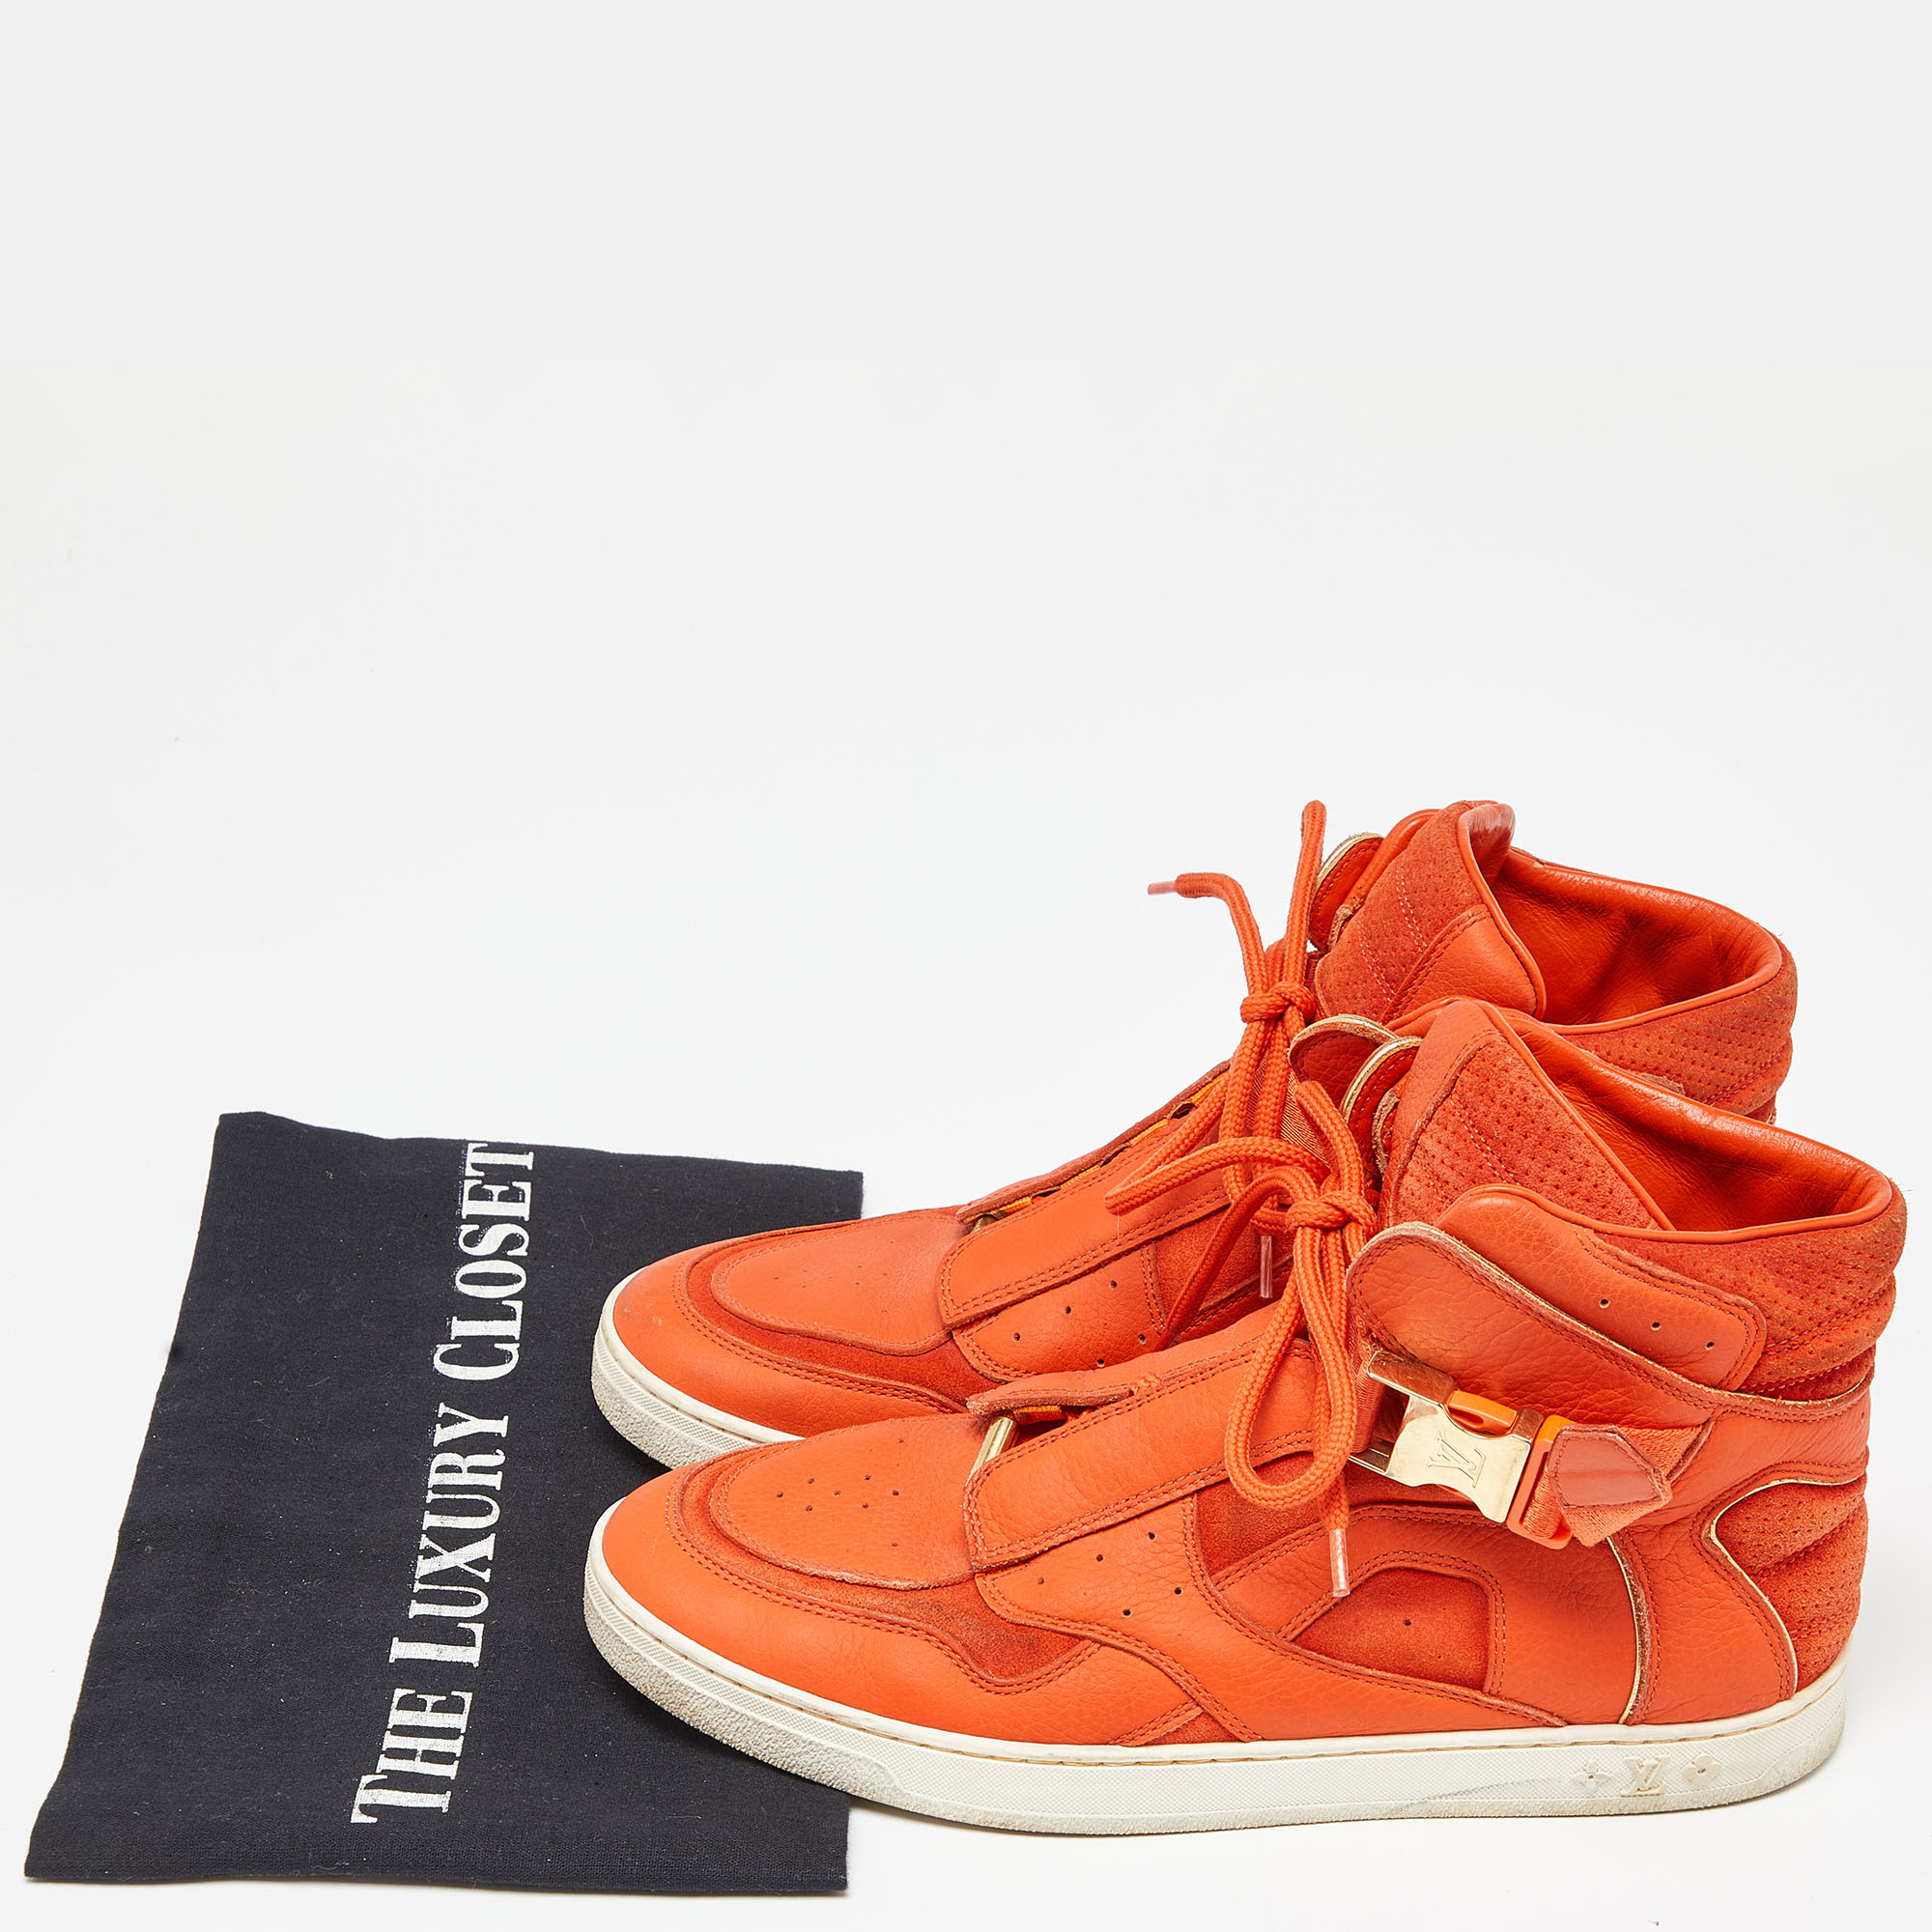 Louis Vuitton Orange Leather And Suede Slipstream High Top Sneakers Size 36